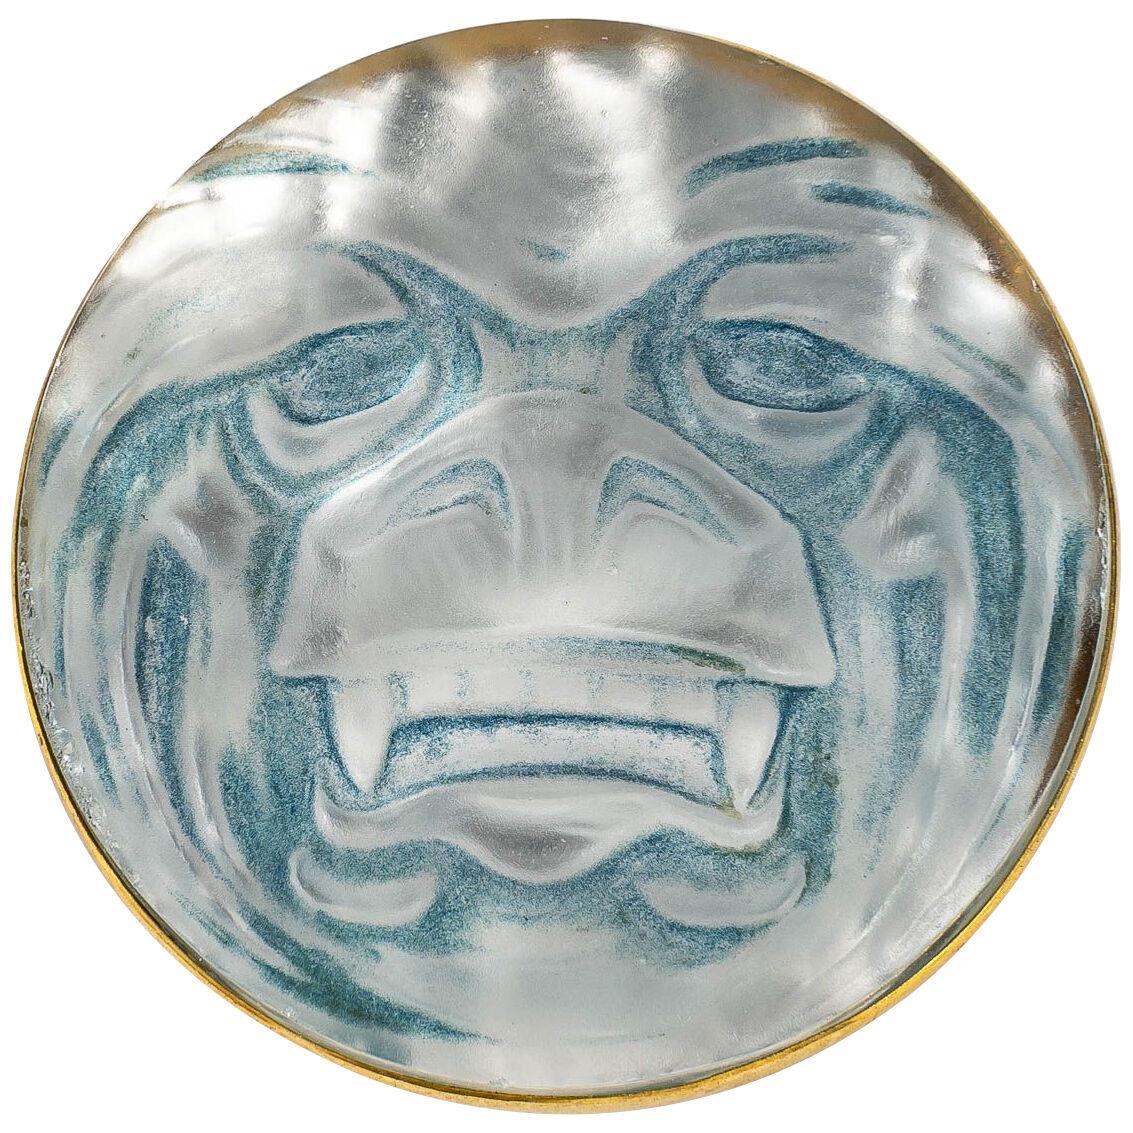 1911 René Lalique - Brooch Masque Frosted Glass On Silver Foil With Blue Patina